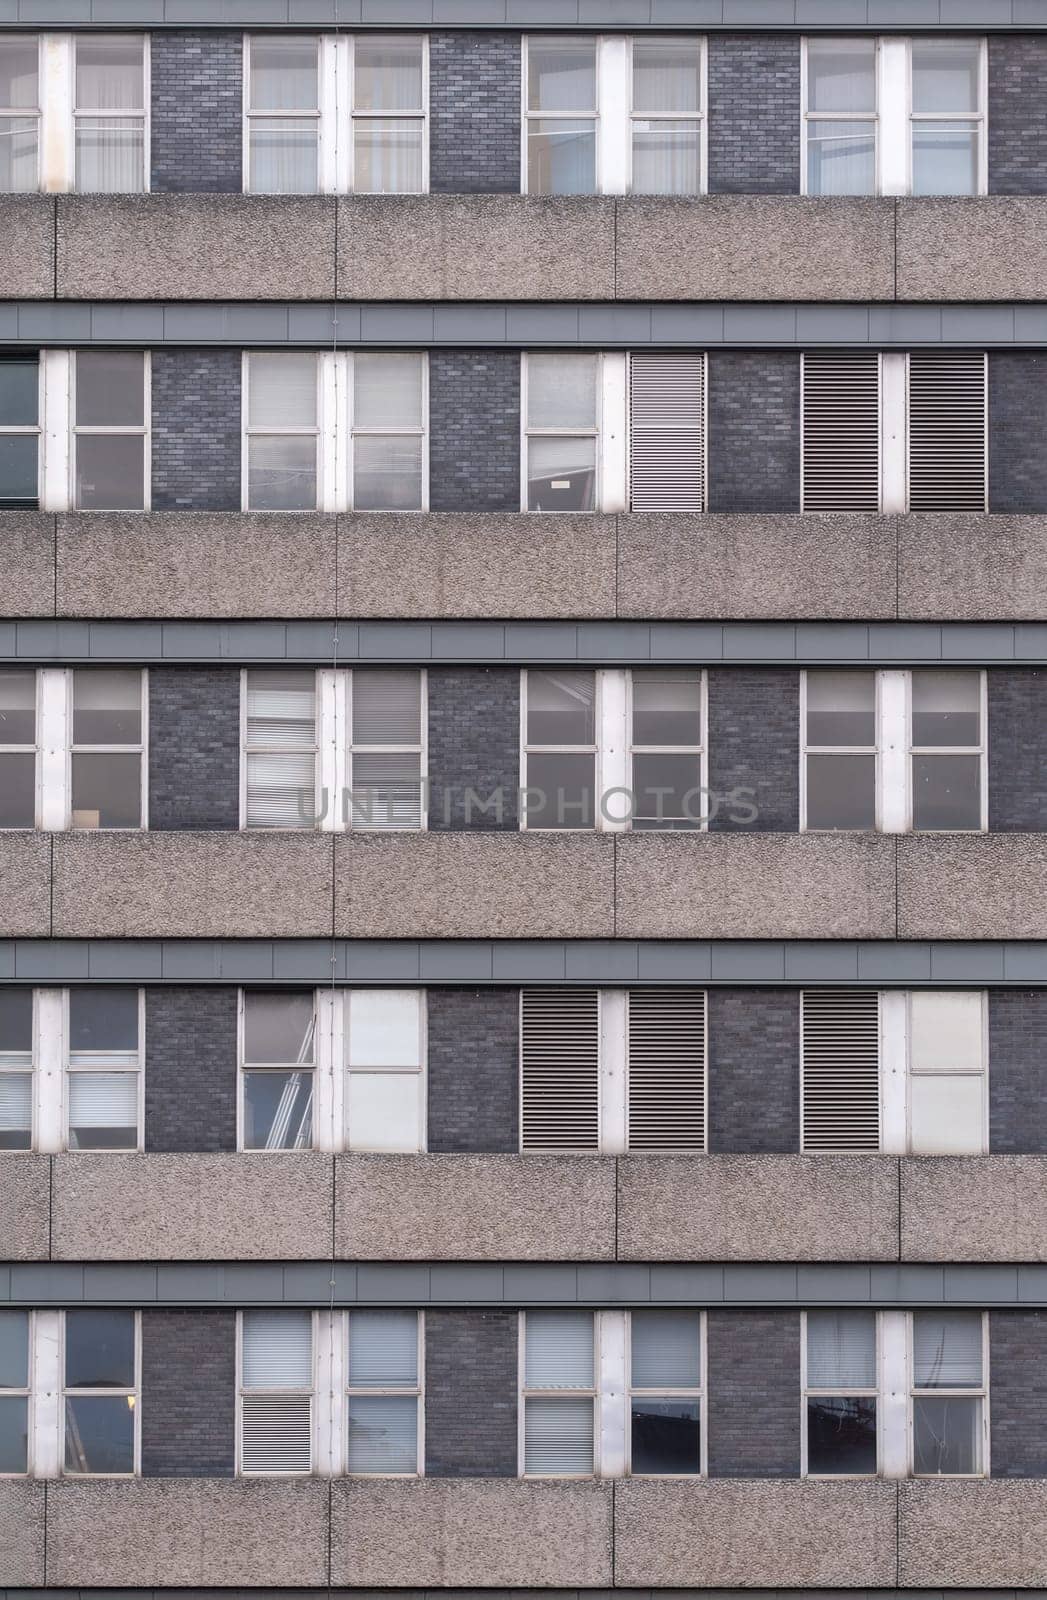 Background Of A Grim 1970s Grey Office Building